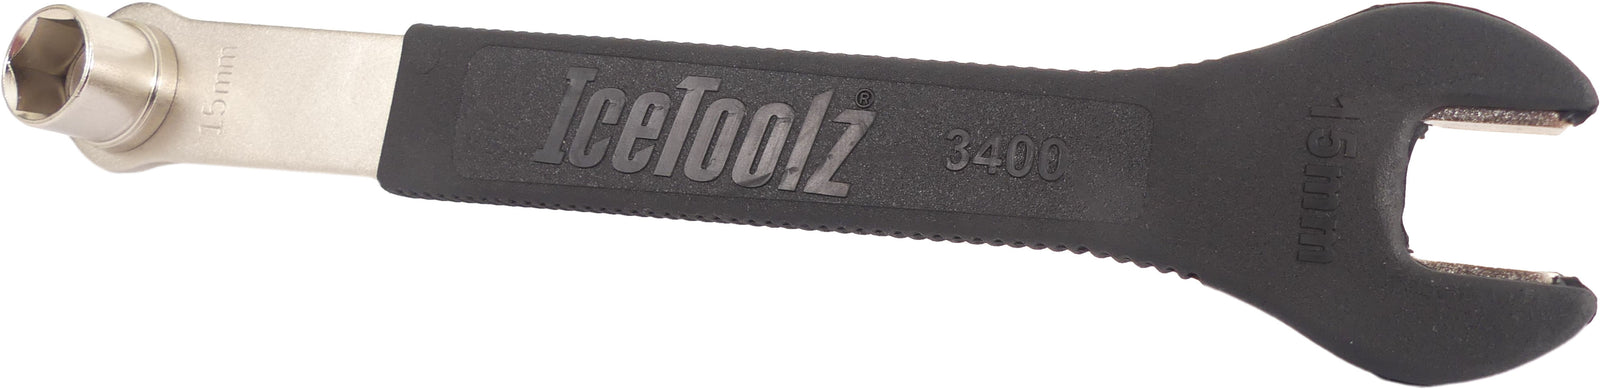 IceToolz 15mm pedaal- dopsleutel 14x15mm